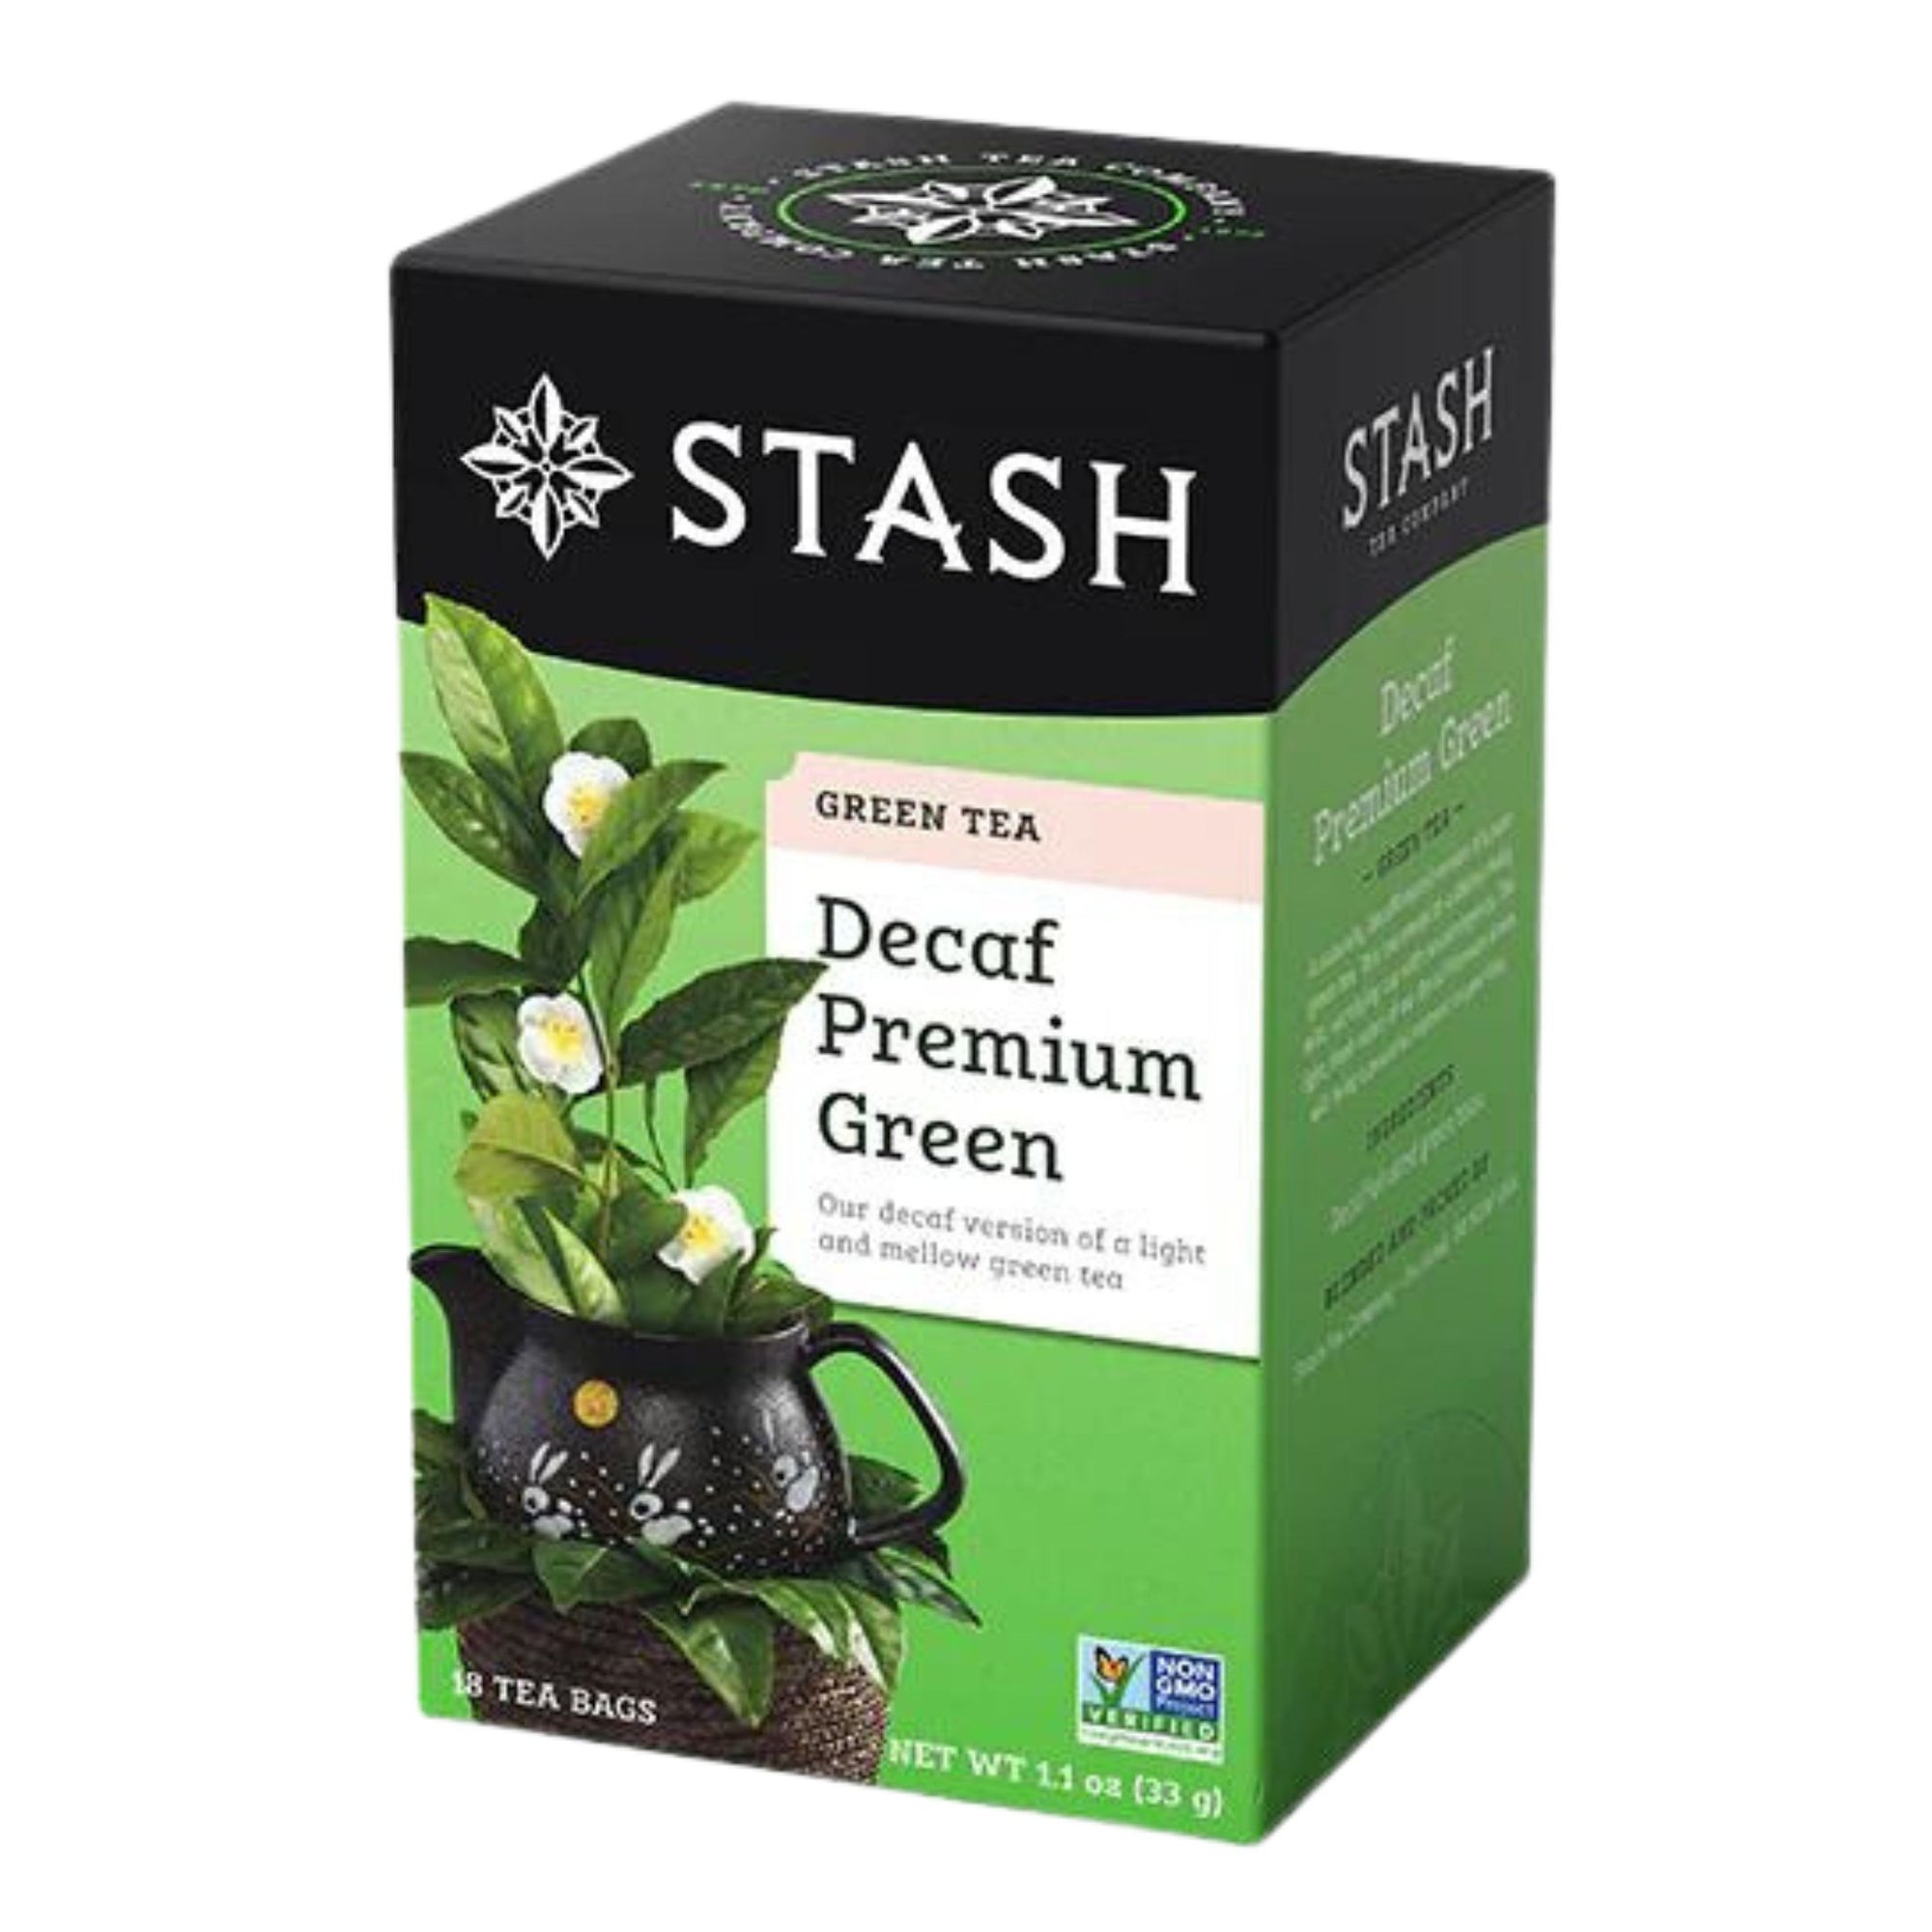 Stash Decaf Premium Green Tea - 18 tea bags in a box - The decaf version of a light and mellow green tea. 